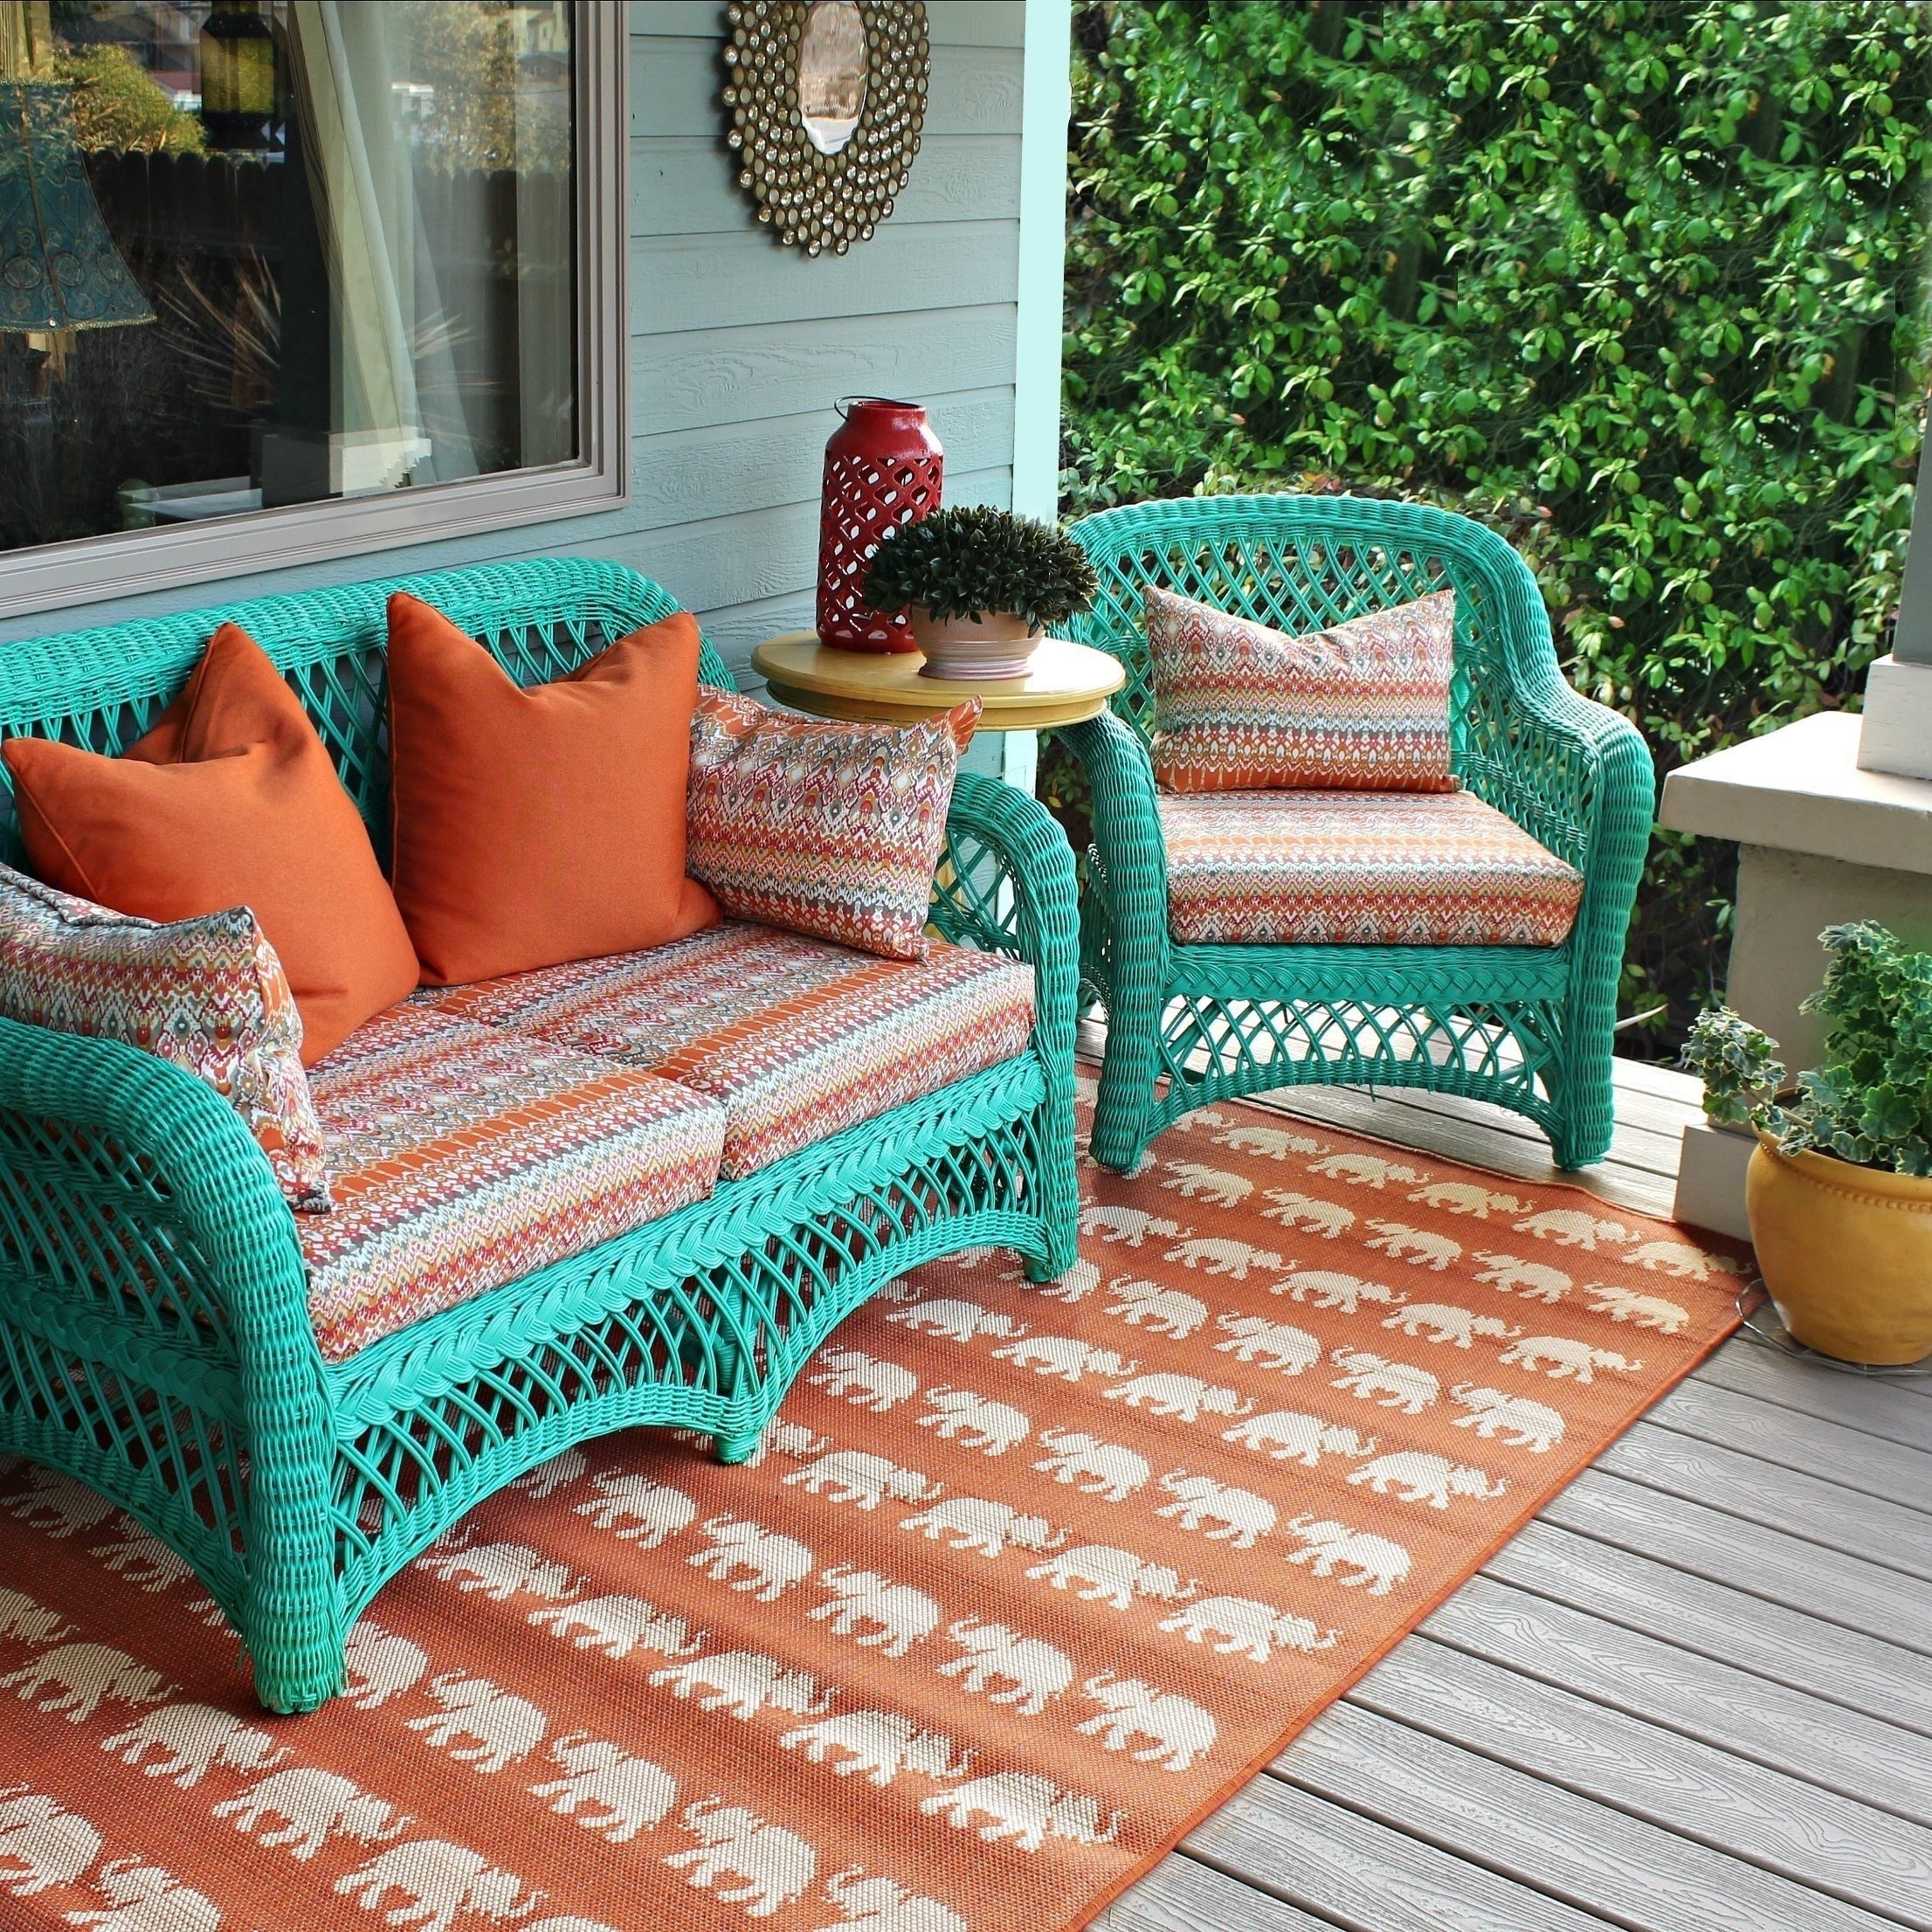 No Sew Patio Cushions And Pillows · How To Make A Pillow/Cushion ...